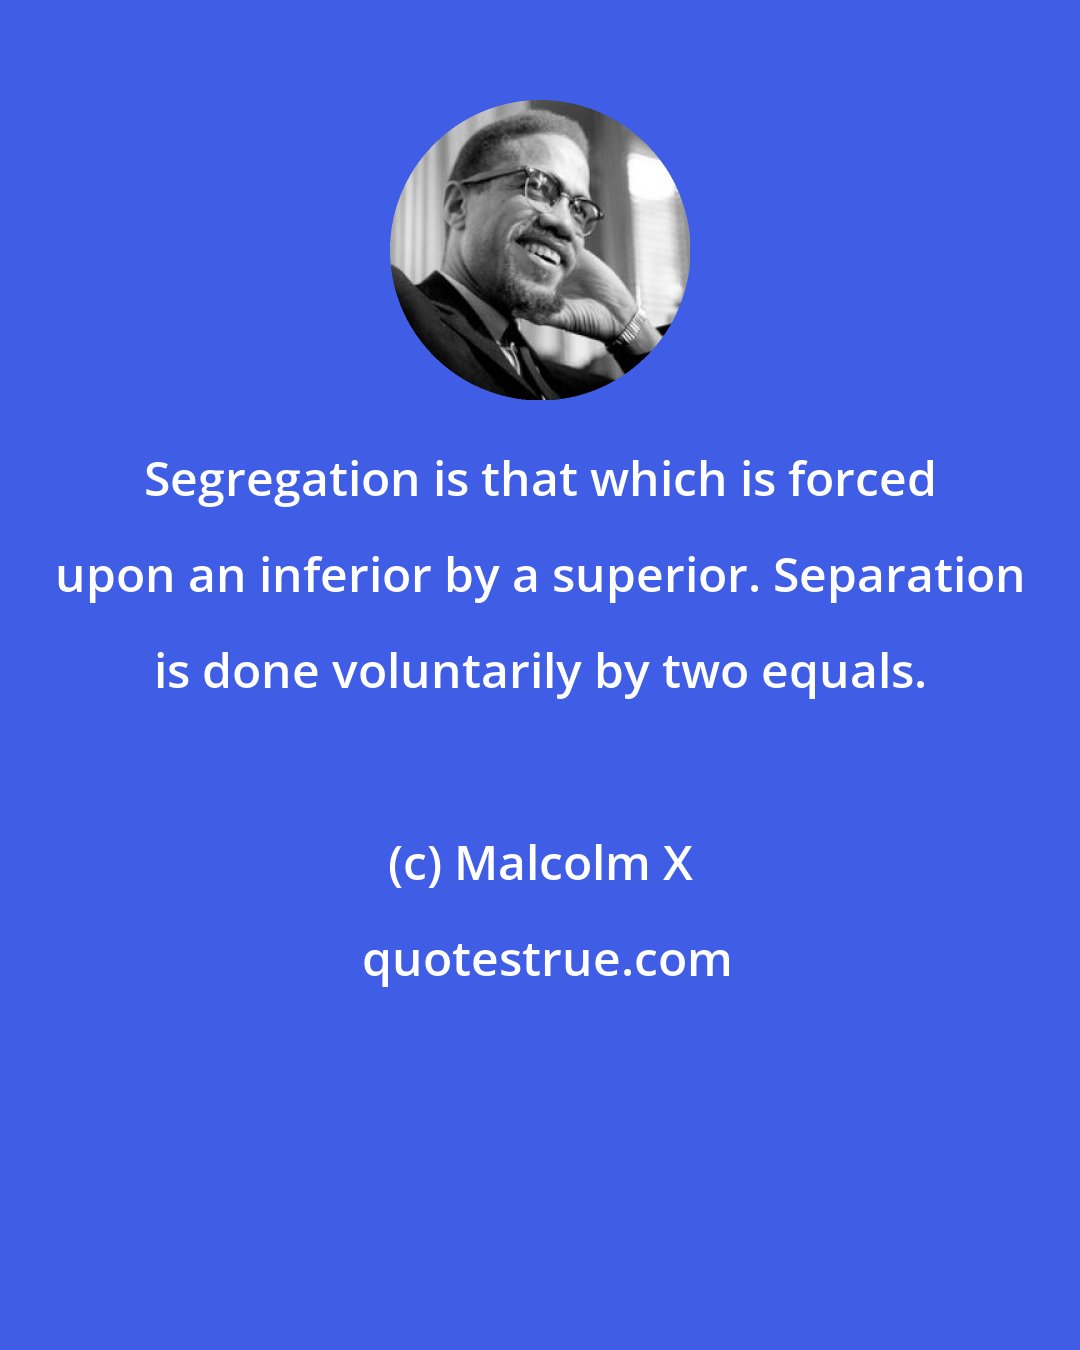 Malcolm X: Segregation is that which is forced upon an inferior by a superior. Separation is done voluntarily by two equals.